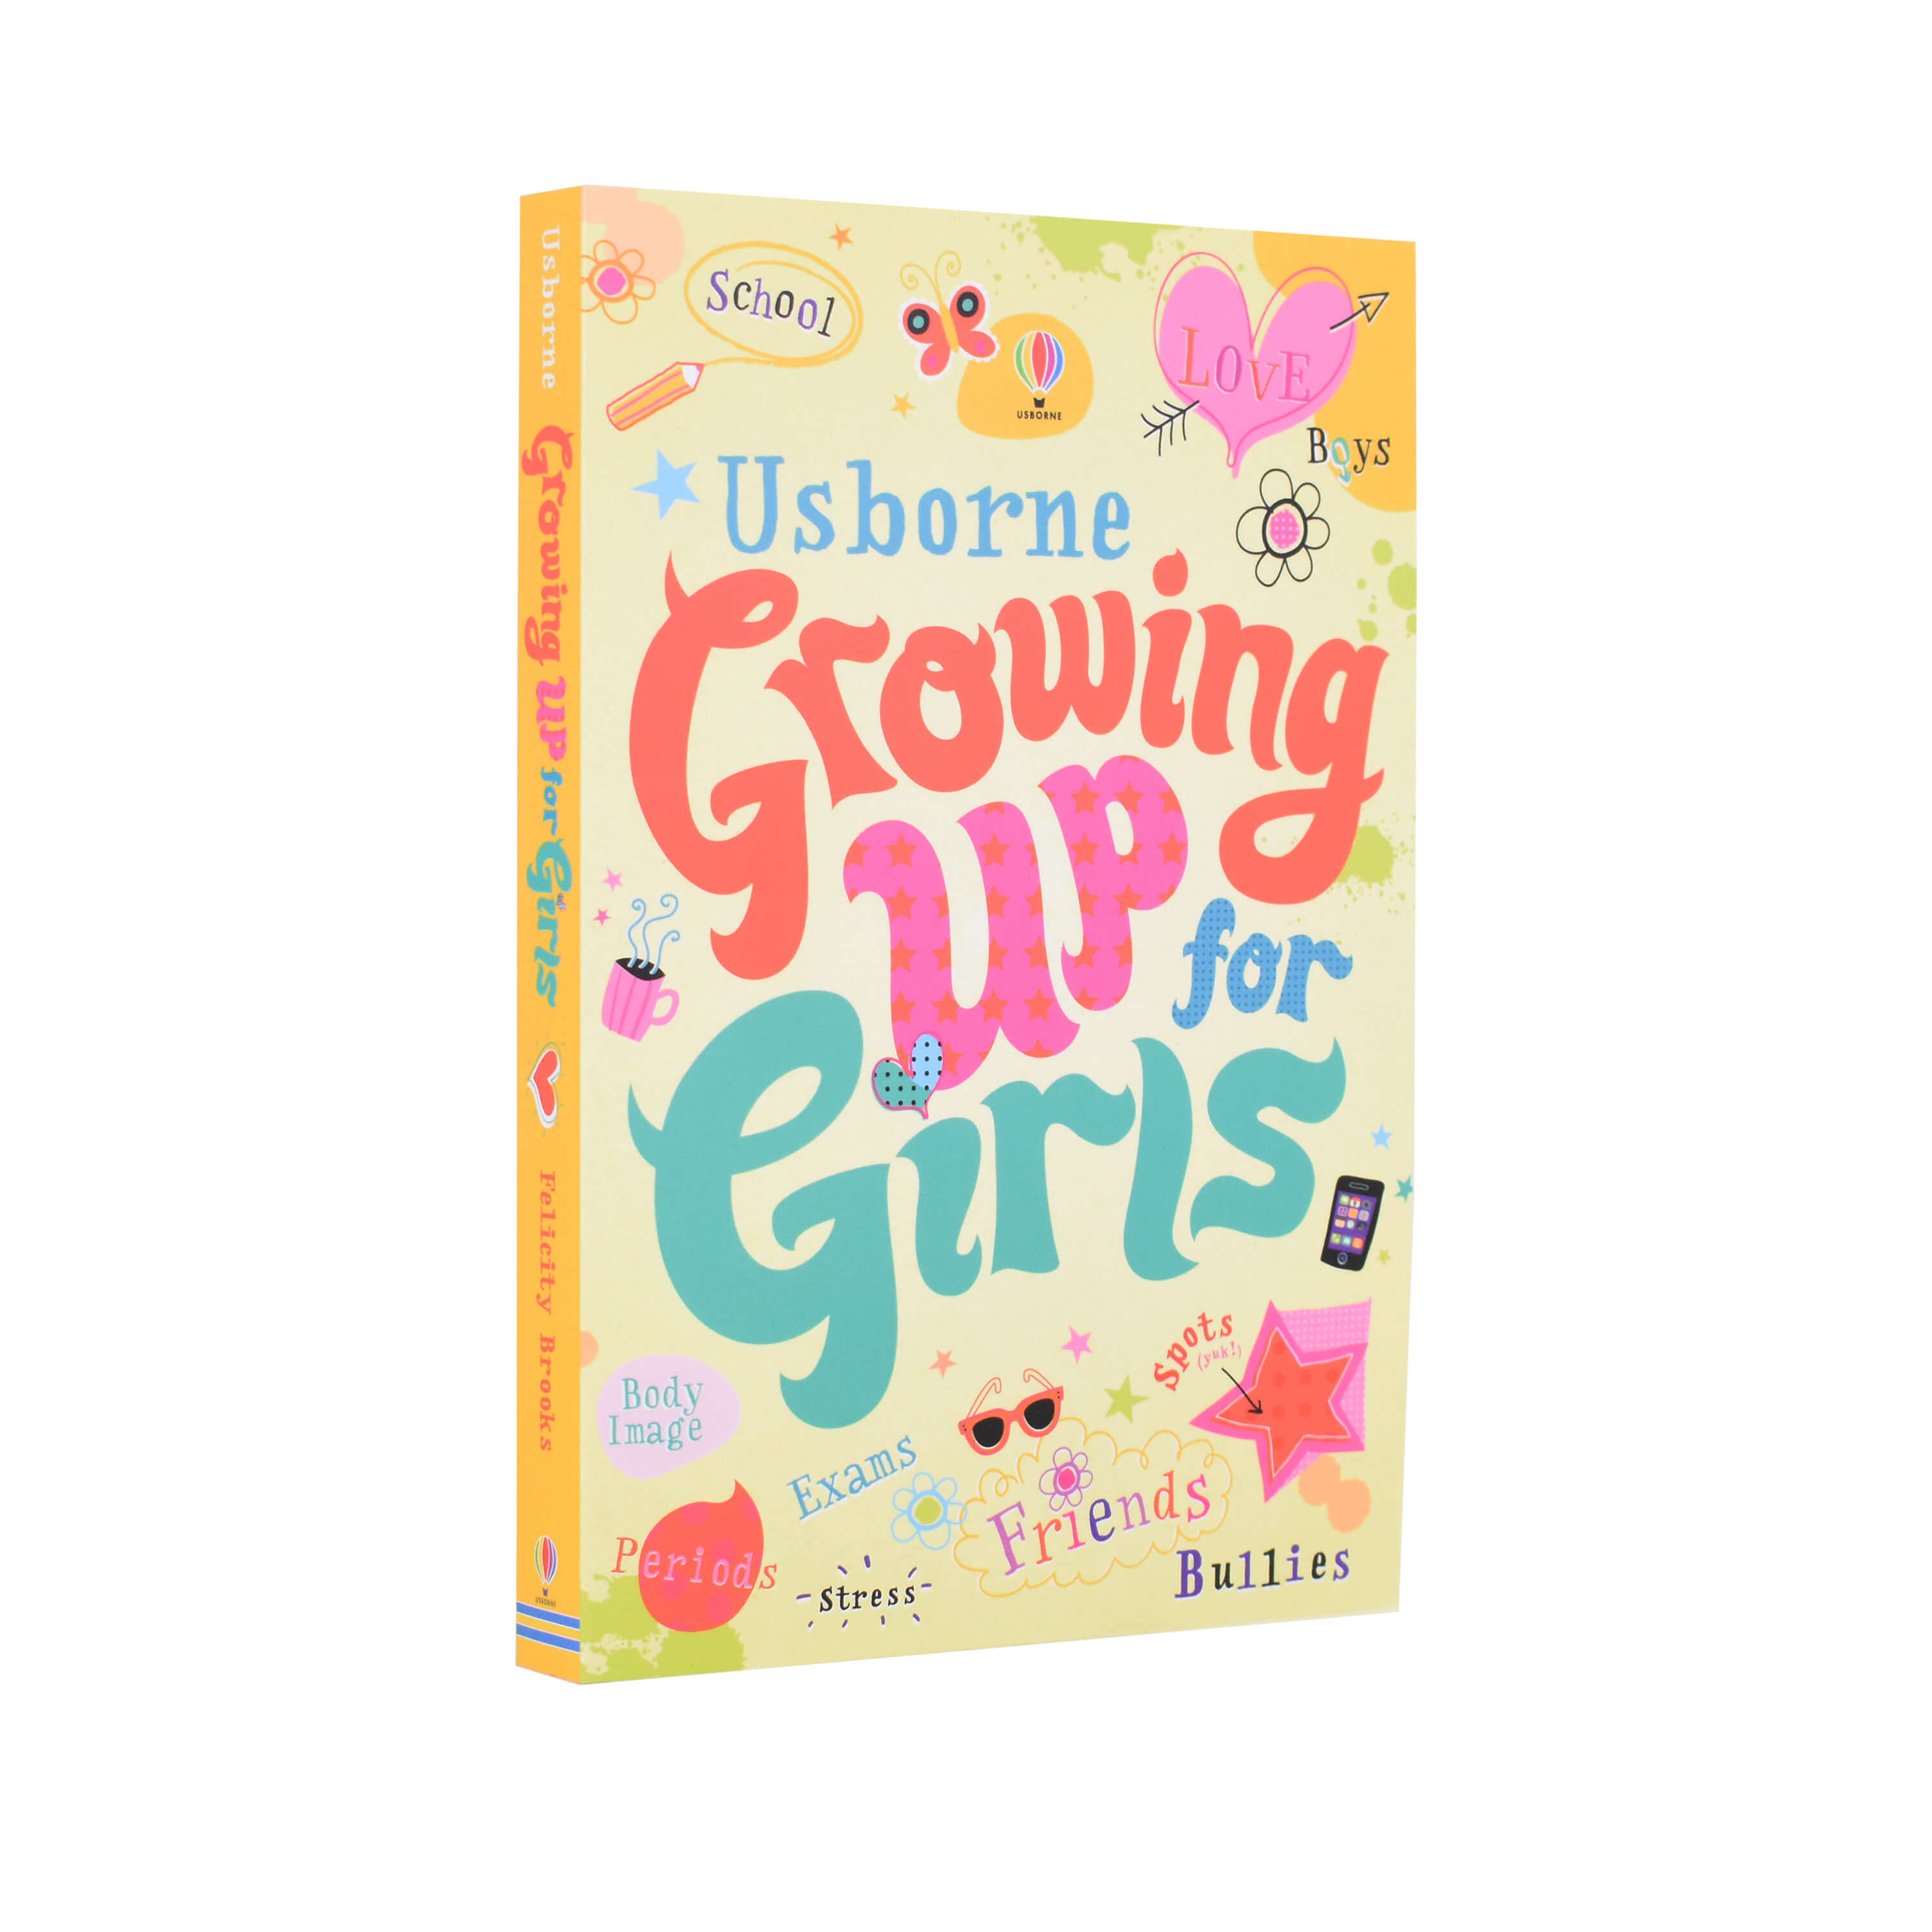 The Girls Guide to Growing Up By Anita Naik & The Boys Guide to Growin